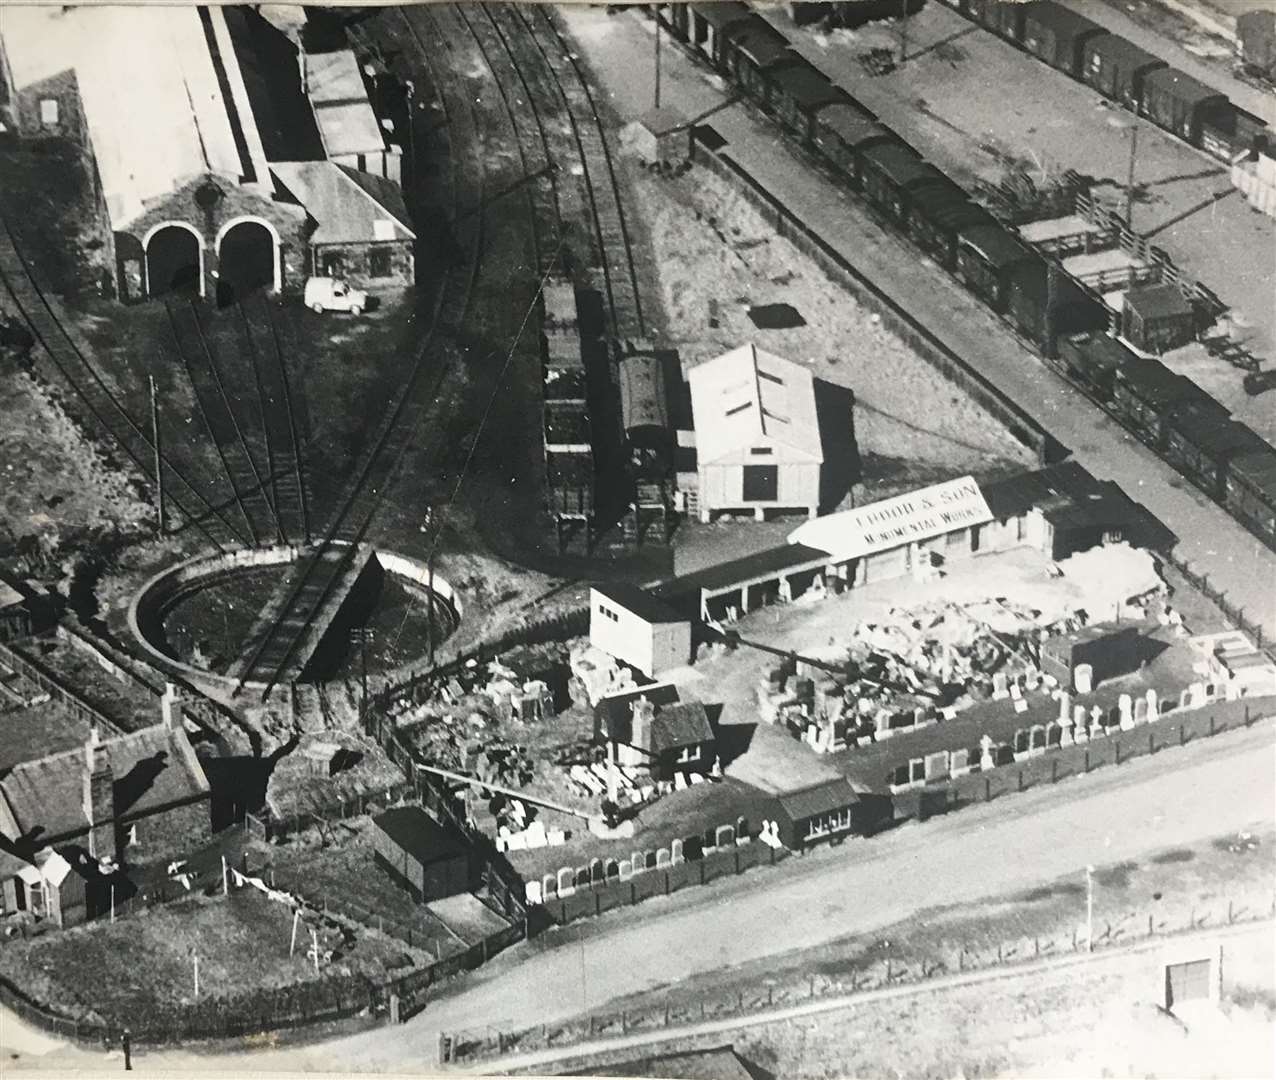 An aerial photograph of local business John Hood & Son, monumental sculptors and masons. The company celebrated their 200th anniversary this year.